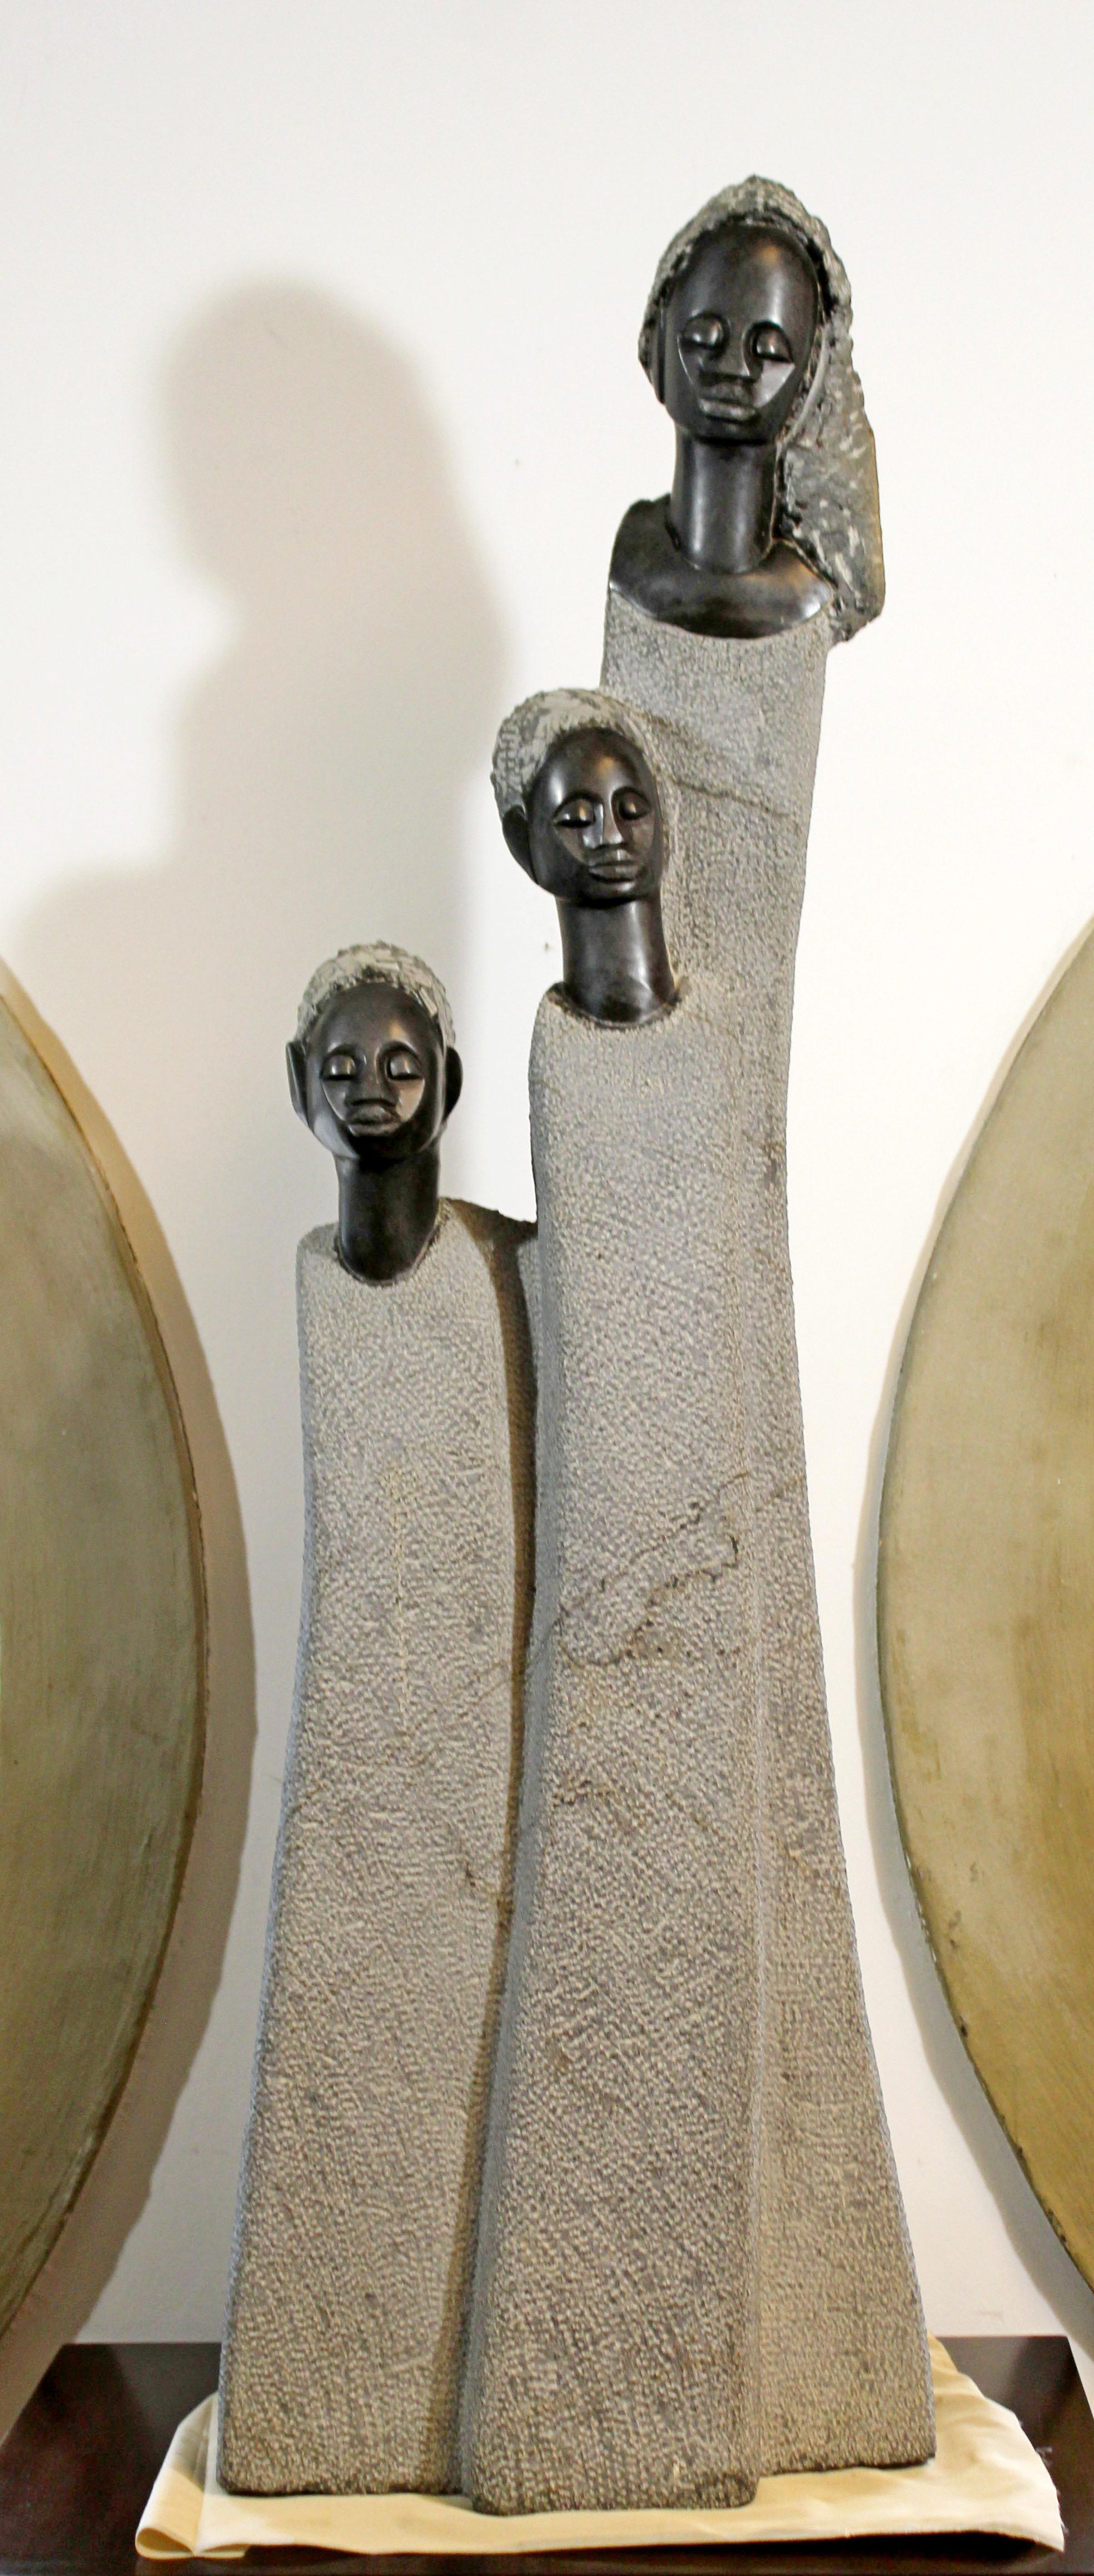 For your consideration is a breathtaking, stone sculpture of three heads, on a wooden base pedestal, signed by Zimbabwean sculptor Joe Mutasa. In excellent condition. The dimensions of the sculpture are 14